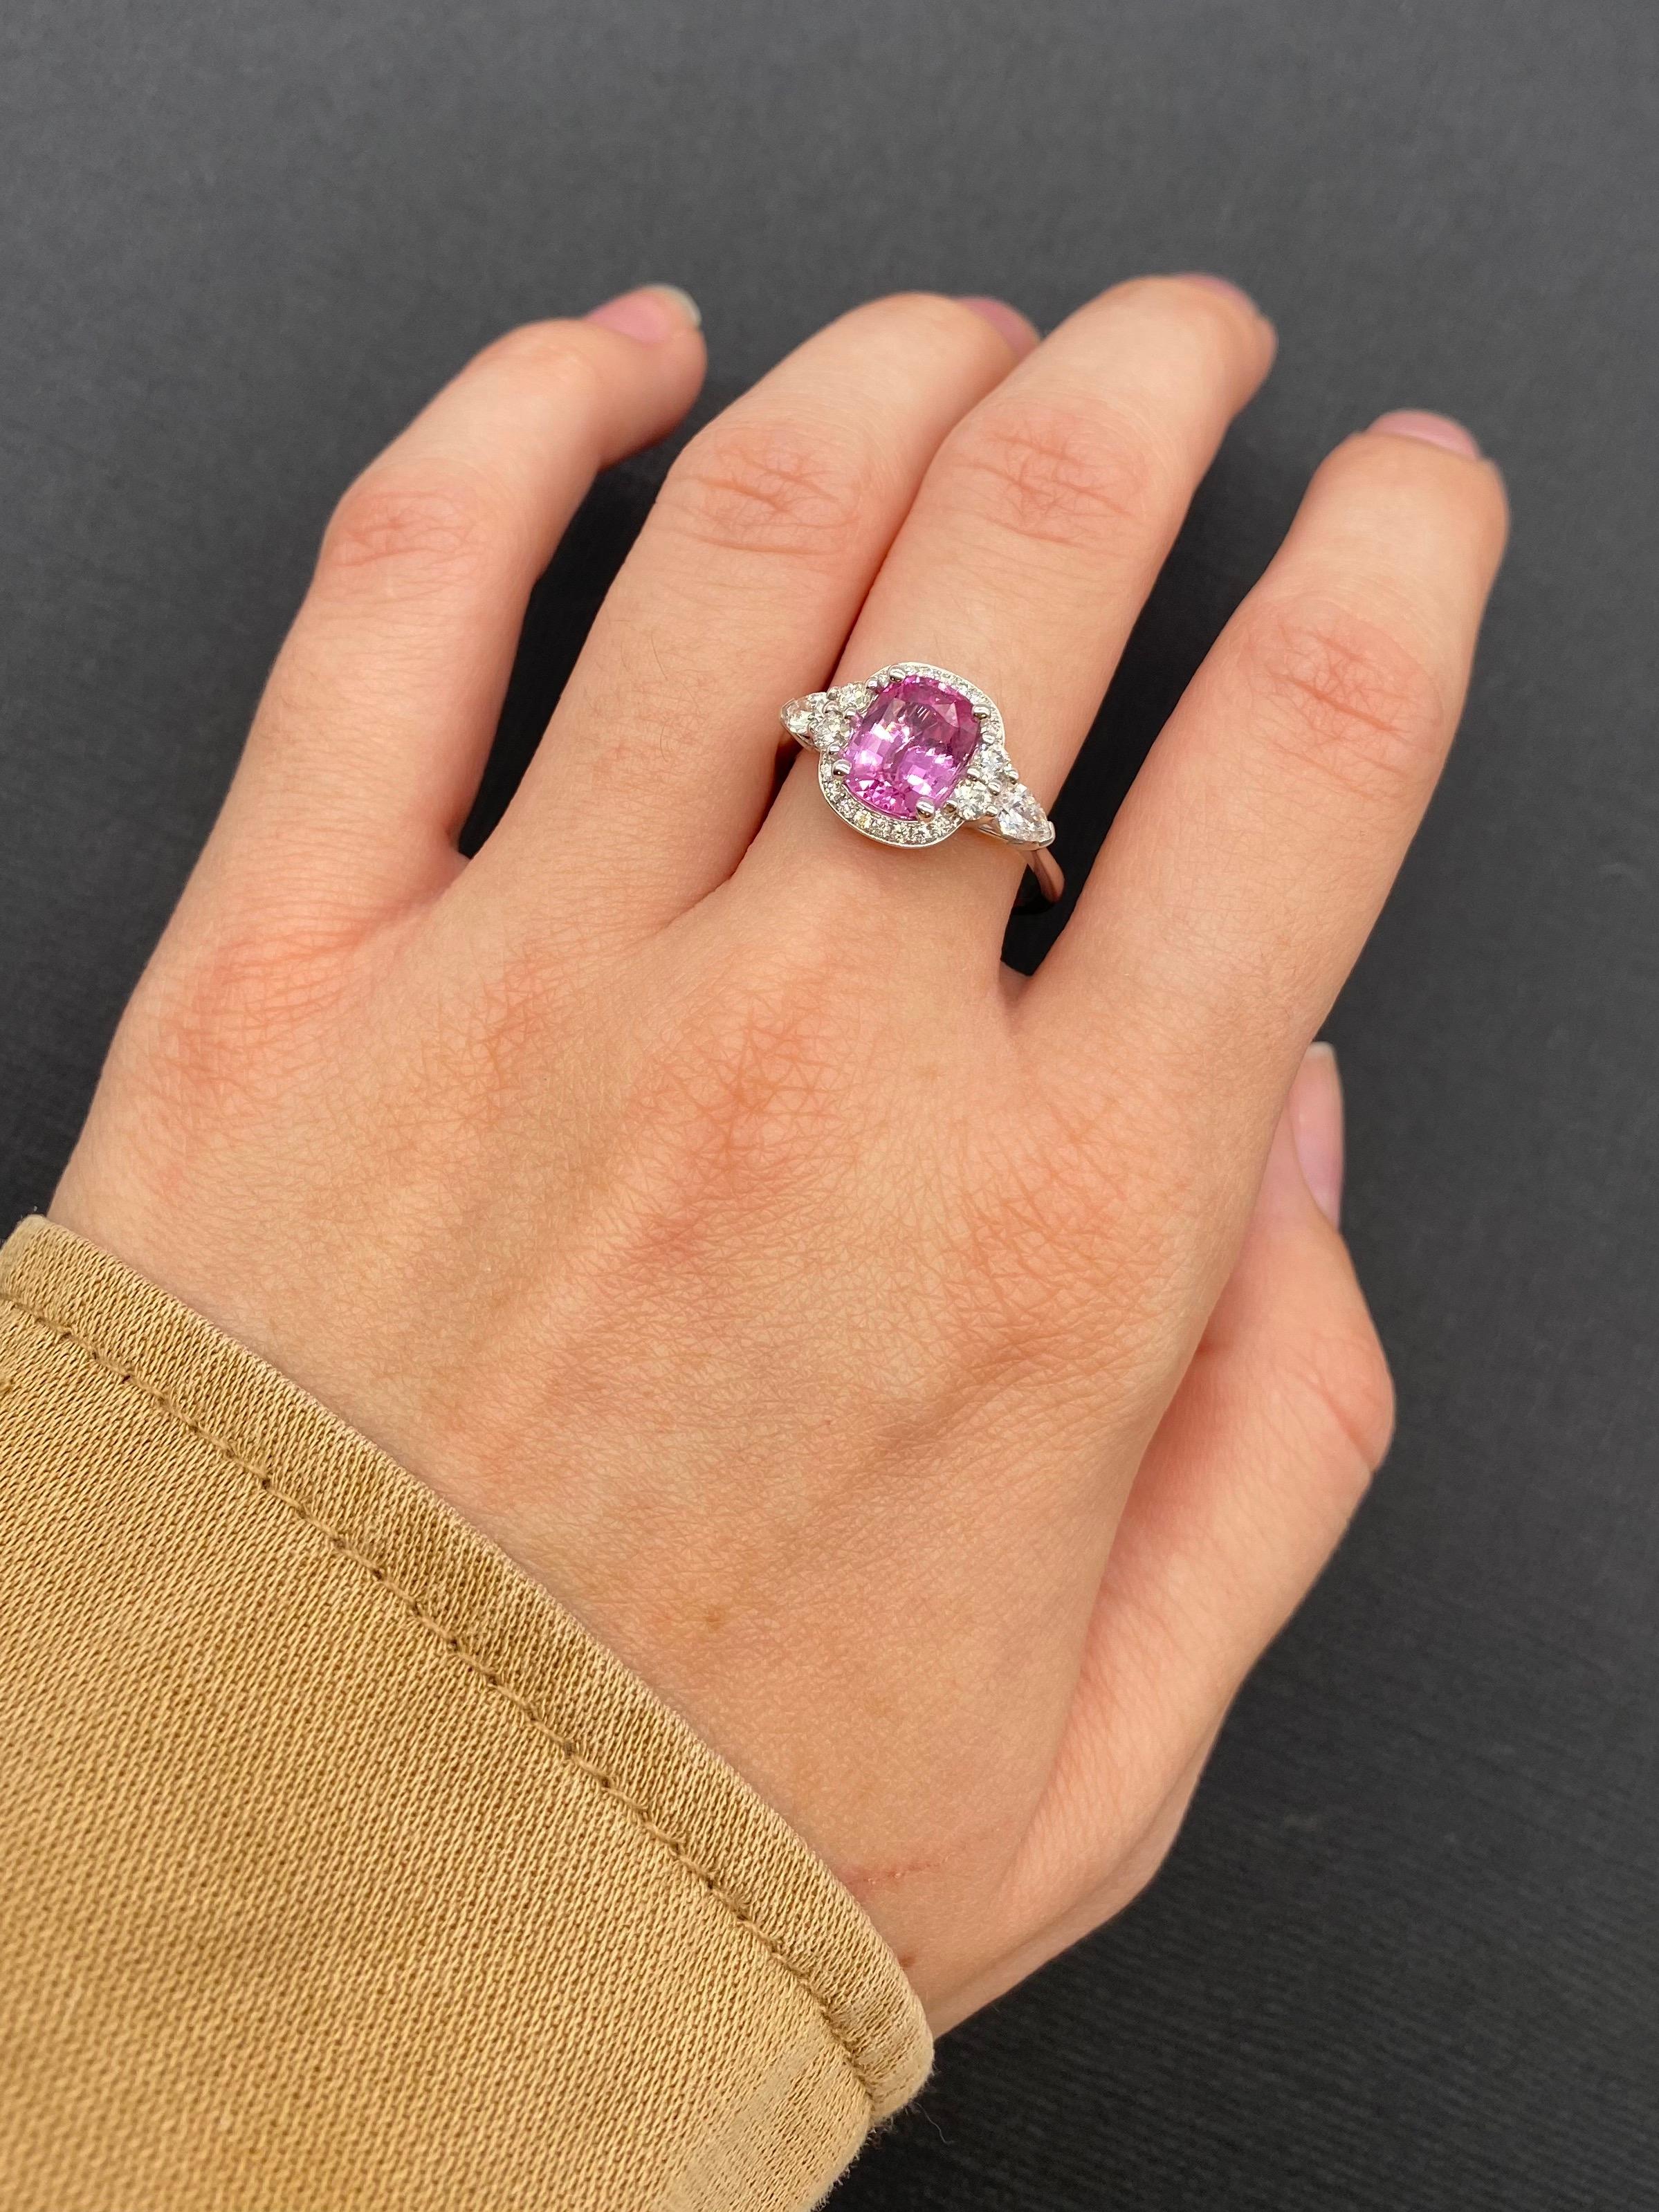 Art Nouveau Gold Engagement Ring Surmounted by a Pink Sapphire Surrounded by Diamonds